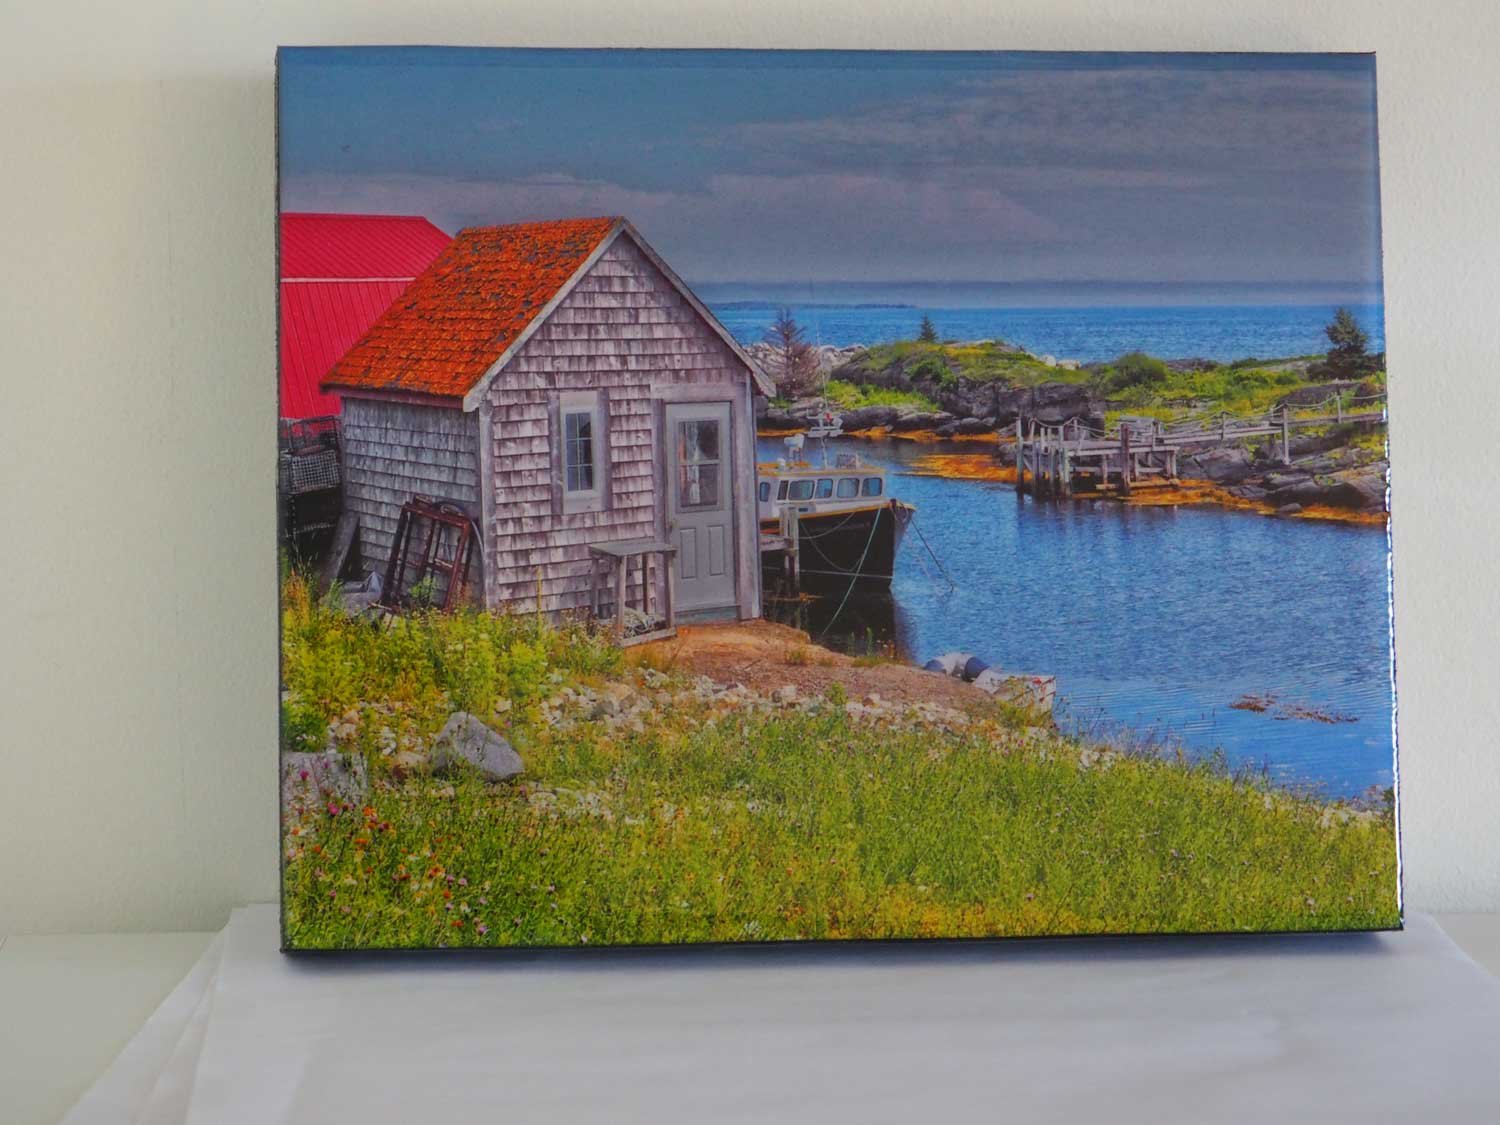 Spectacular view of Blue Rocks harbour featuring a picturesque shingle cabin. Photography 8 x 10 inches covered with resin. Ready-to-hang in your favorite room.